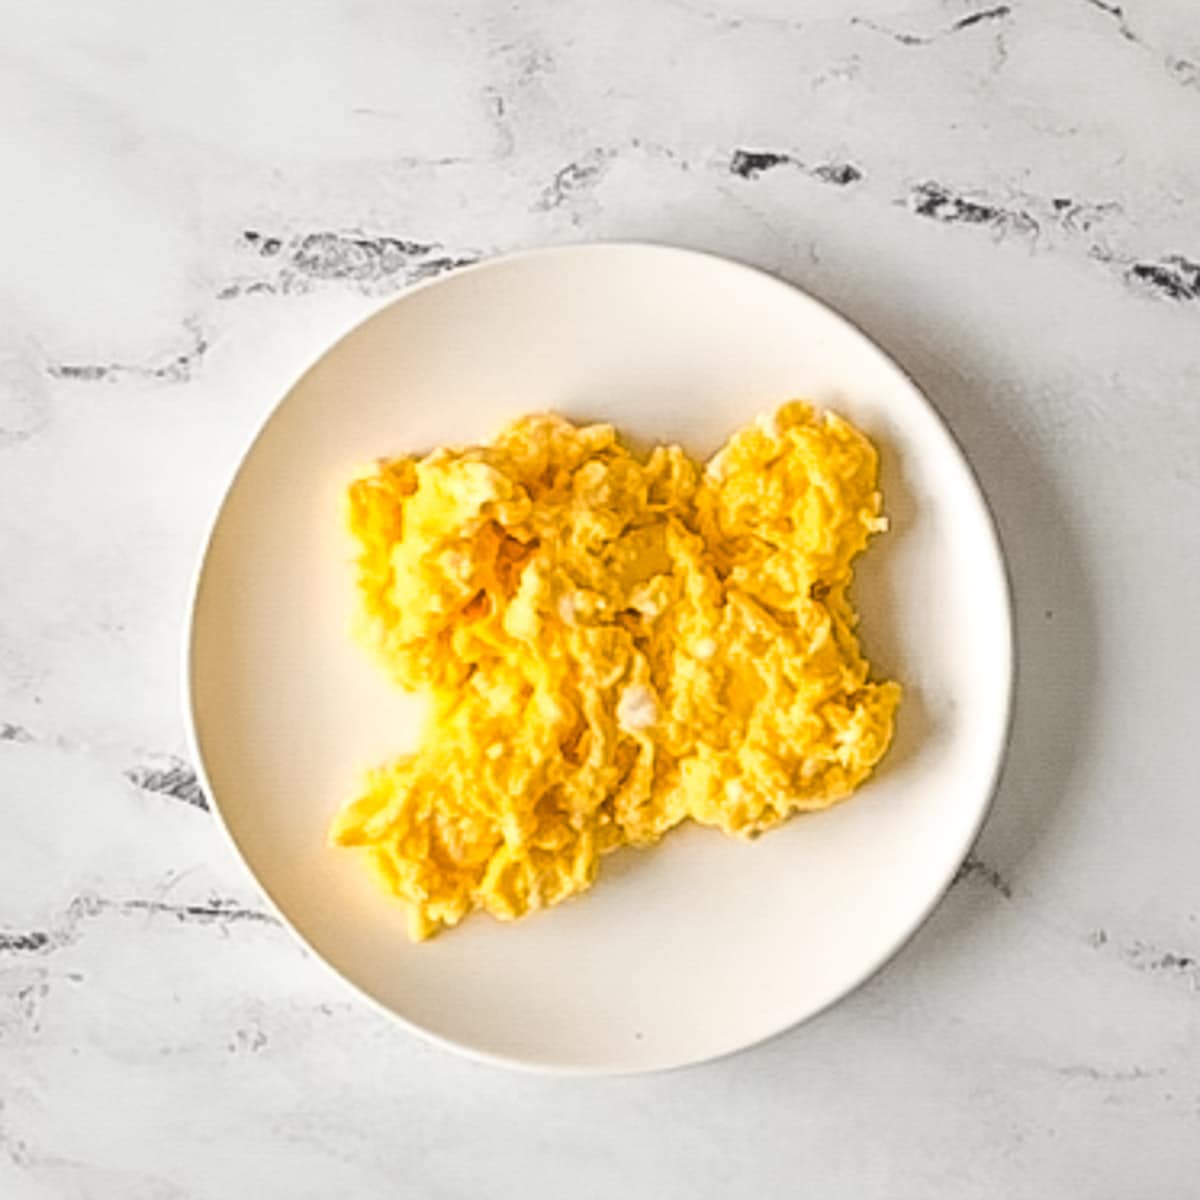 cooked scrambled eggs on a white plate.